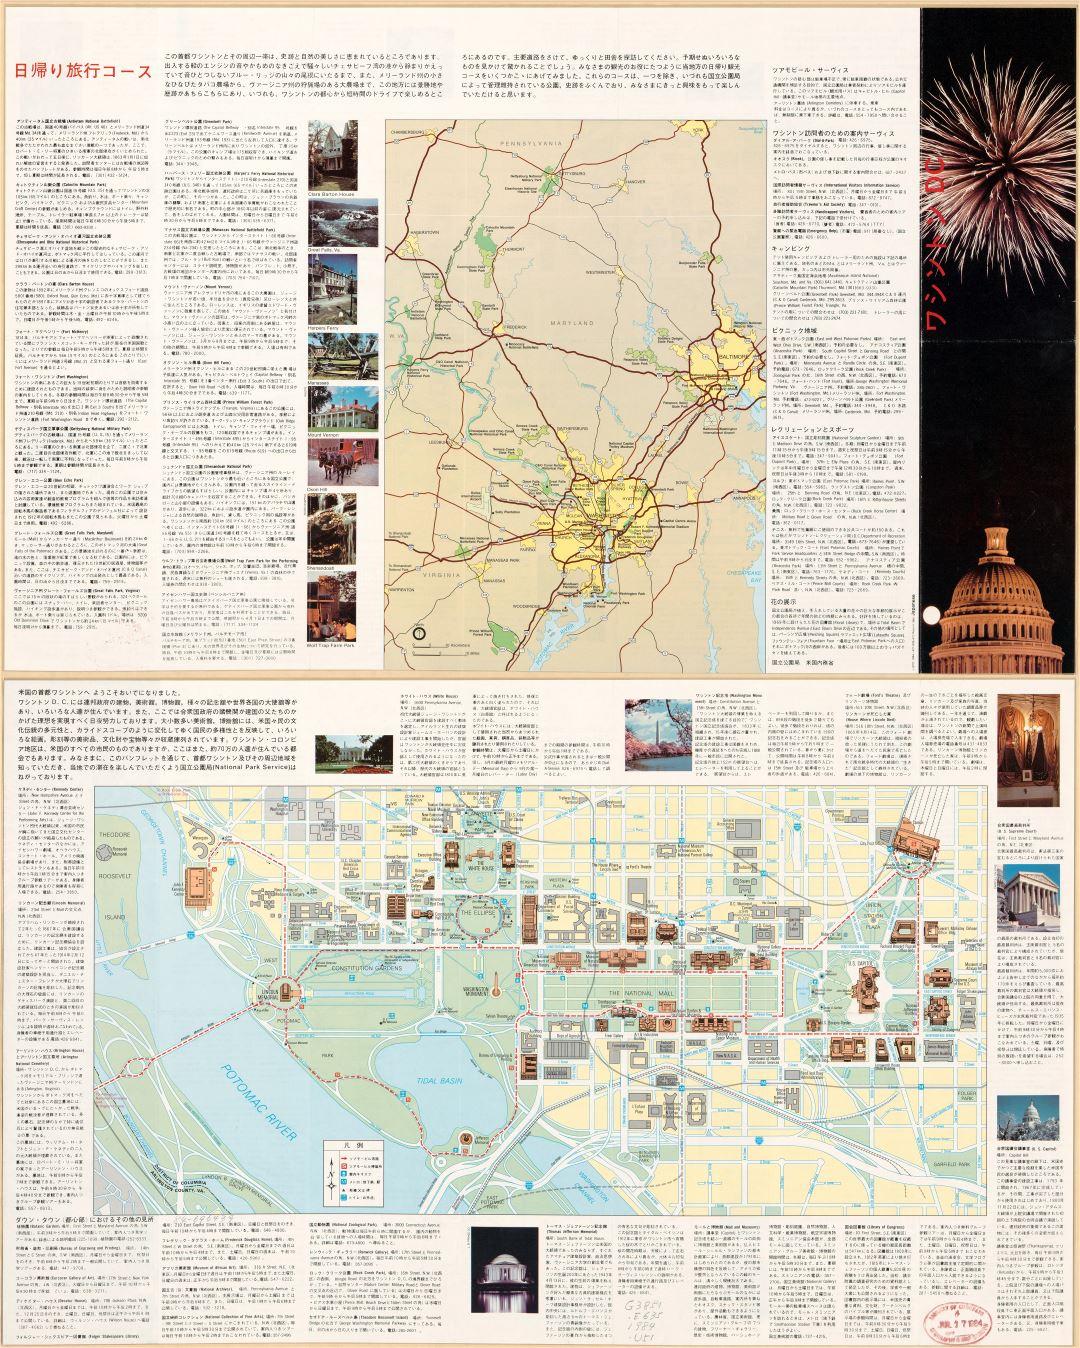 Large scale detailed tourist map of Washington D.C. in chinese - 1984